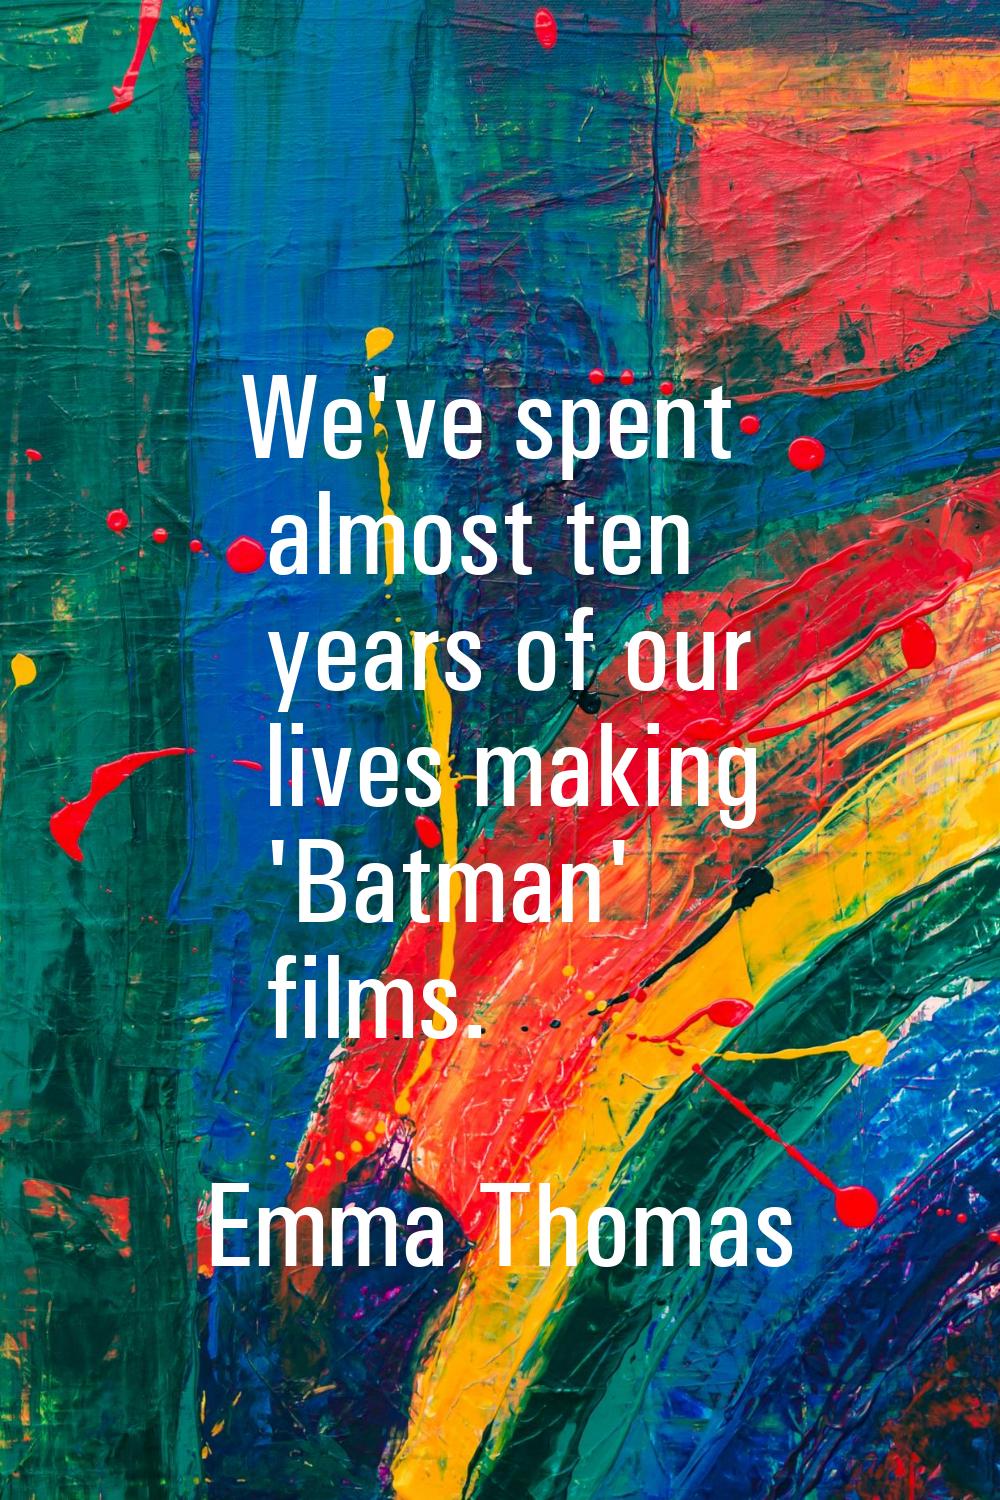 We've spent almost ten years of our lives making 'Batman' films.